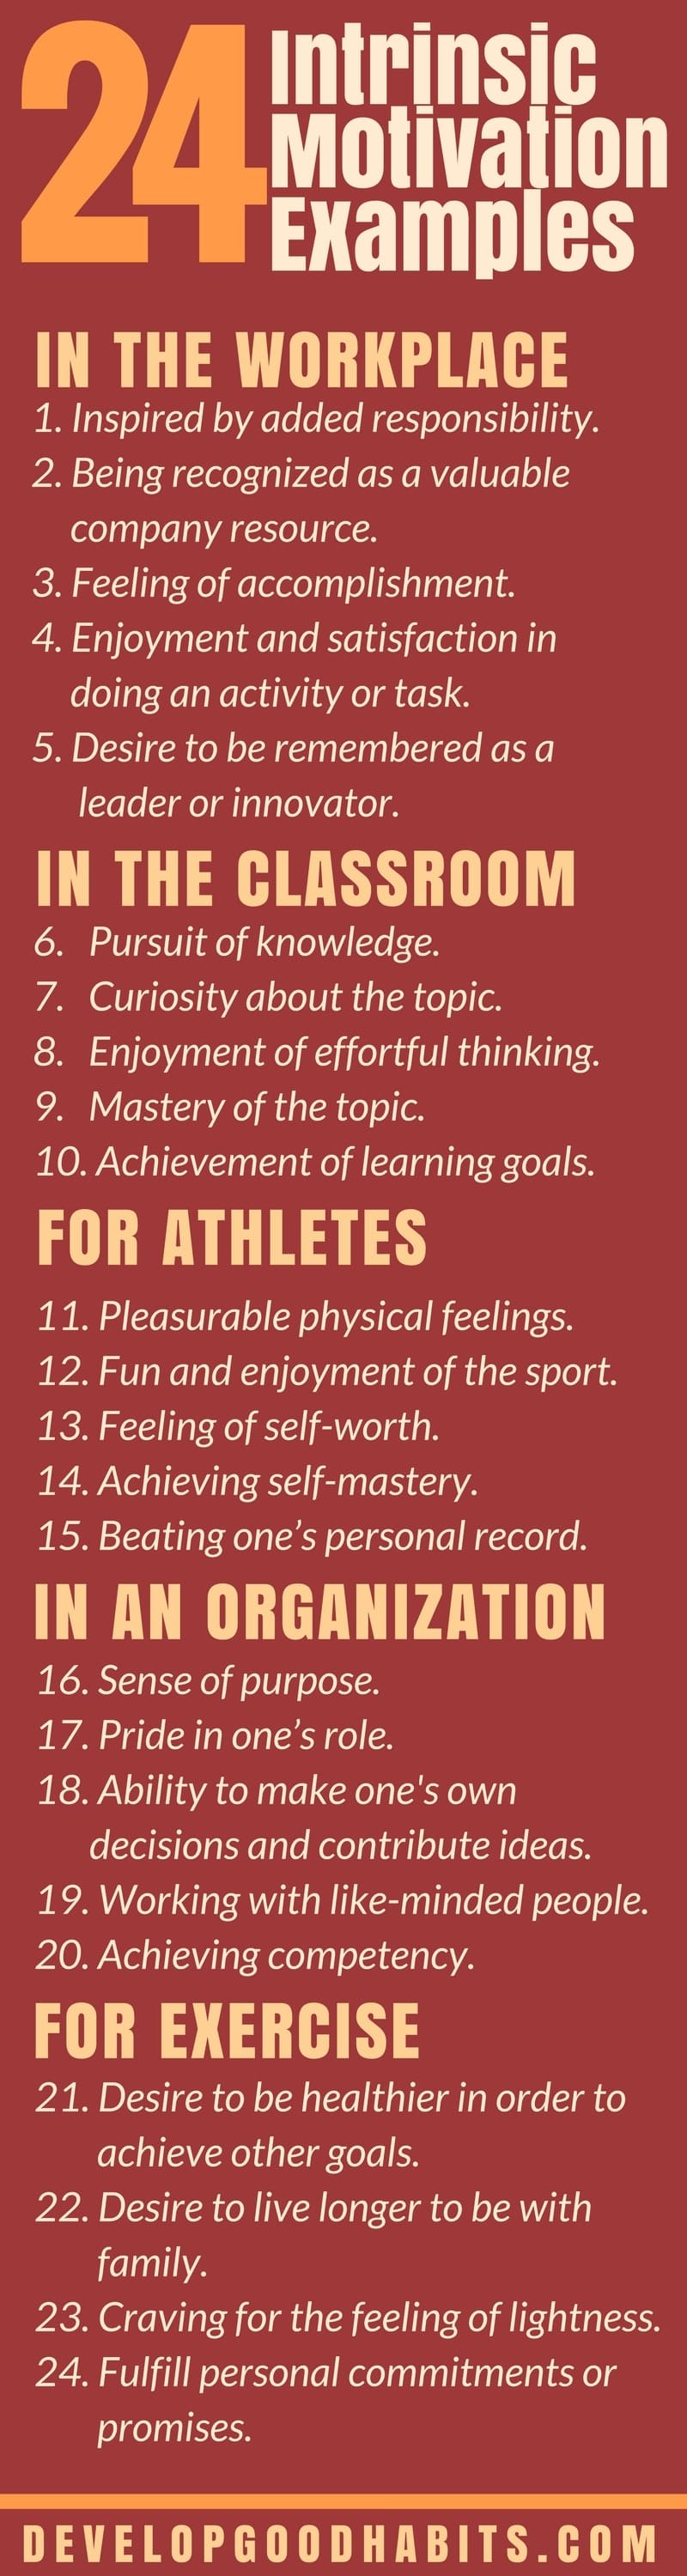 Check out this Intrinsic Motivation Examples #Infographic and learn how to feel greater satisfaction in your achievements. #personaldevelopment #personalgrowth #success #motivation #inspiration #habits #change #psychology #mentalhealth #mindset #selfhelp